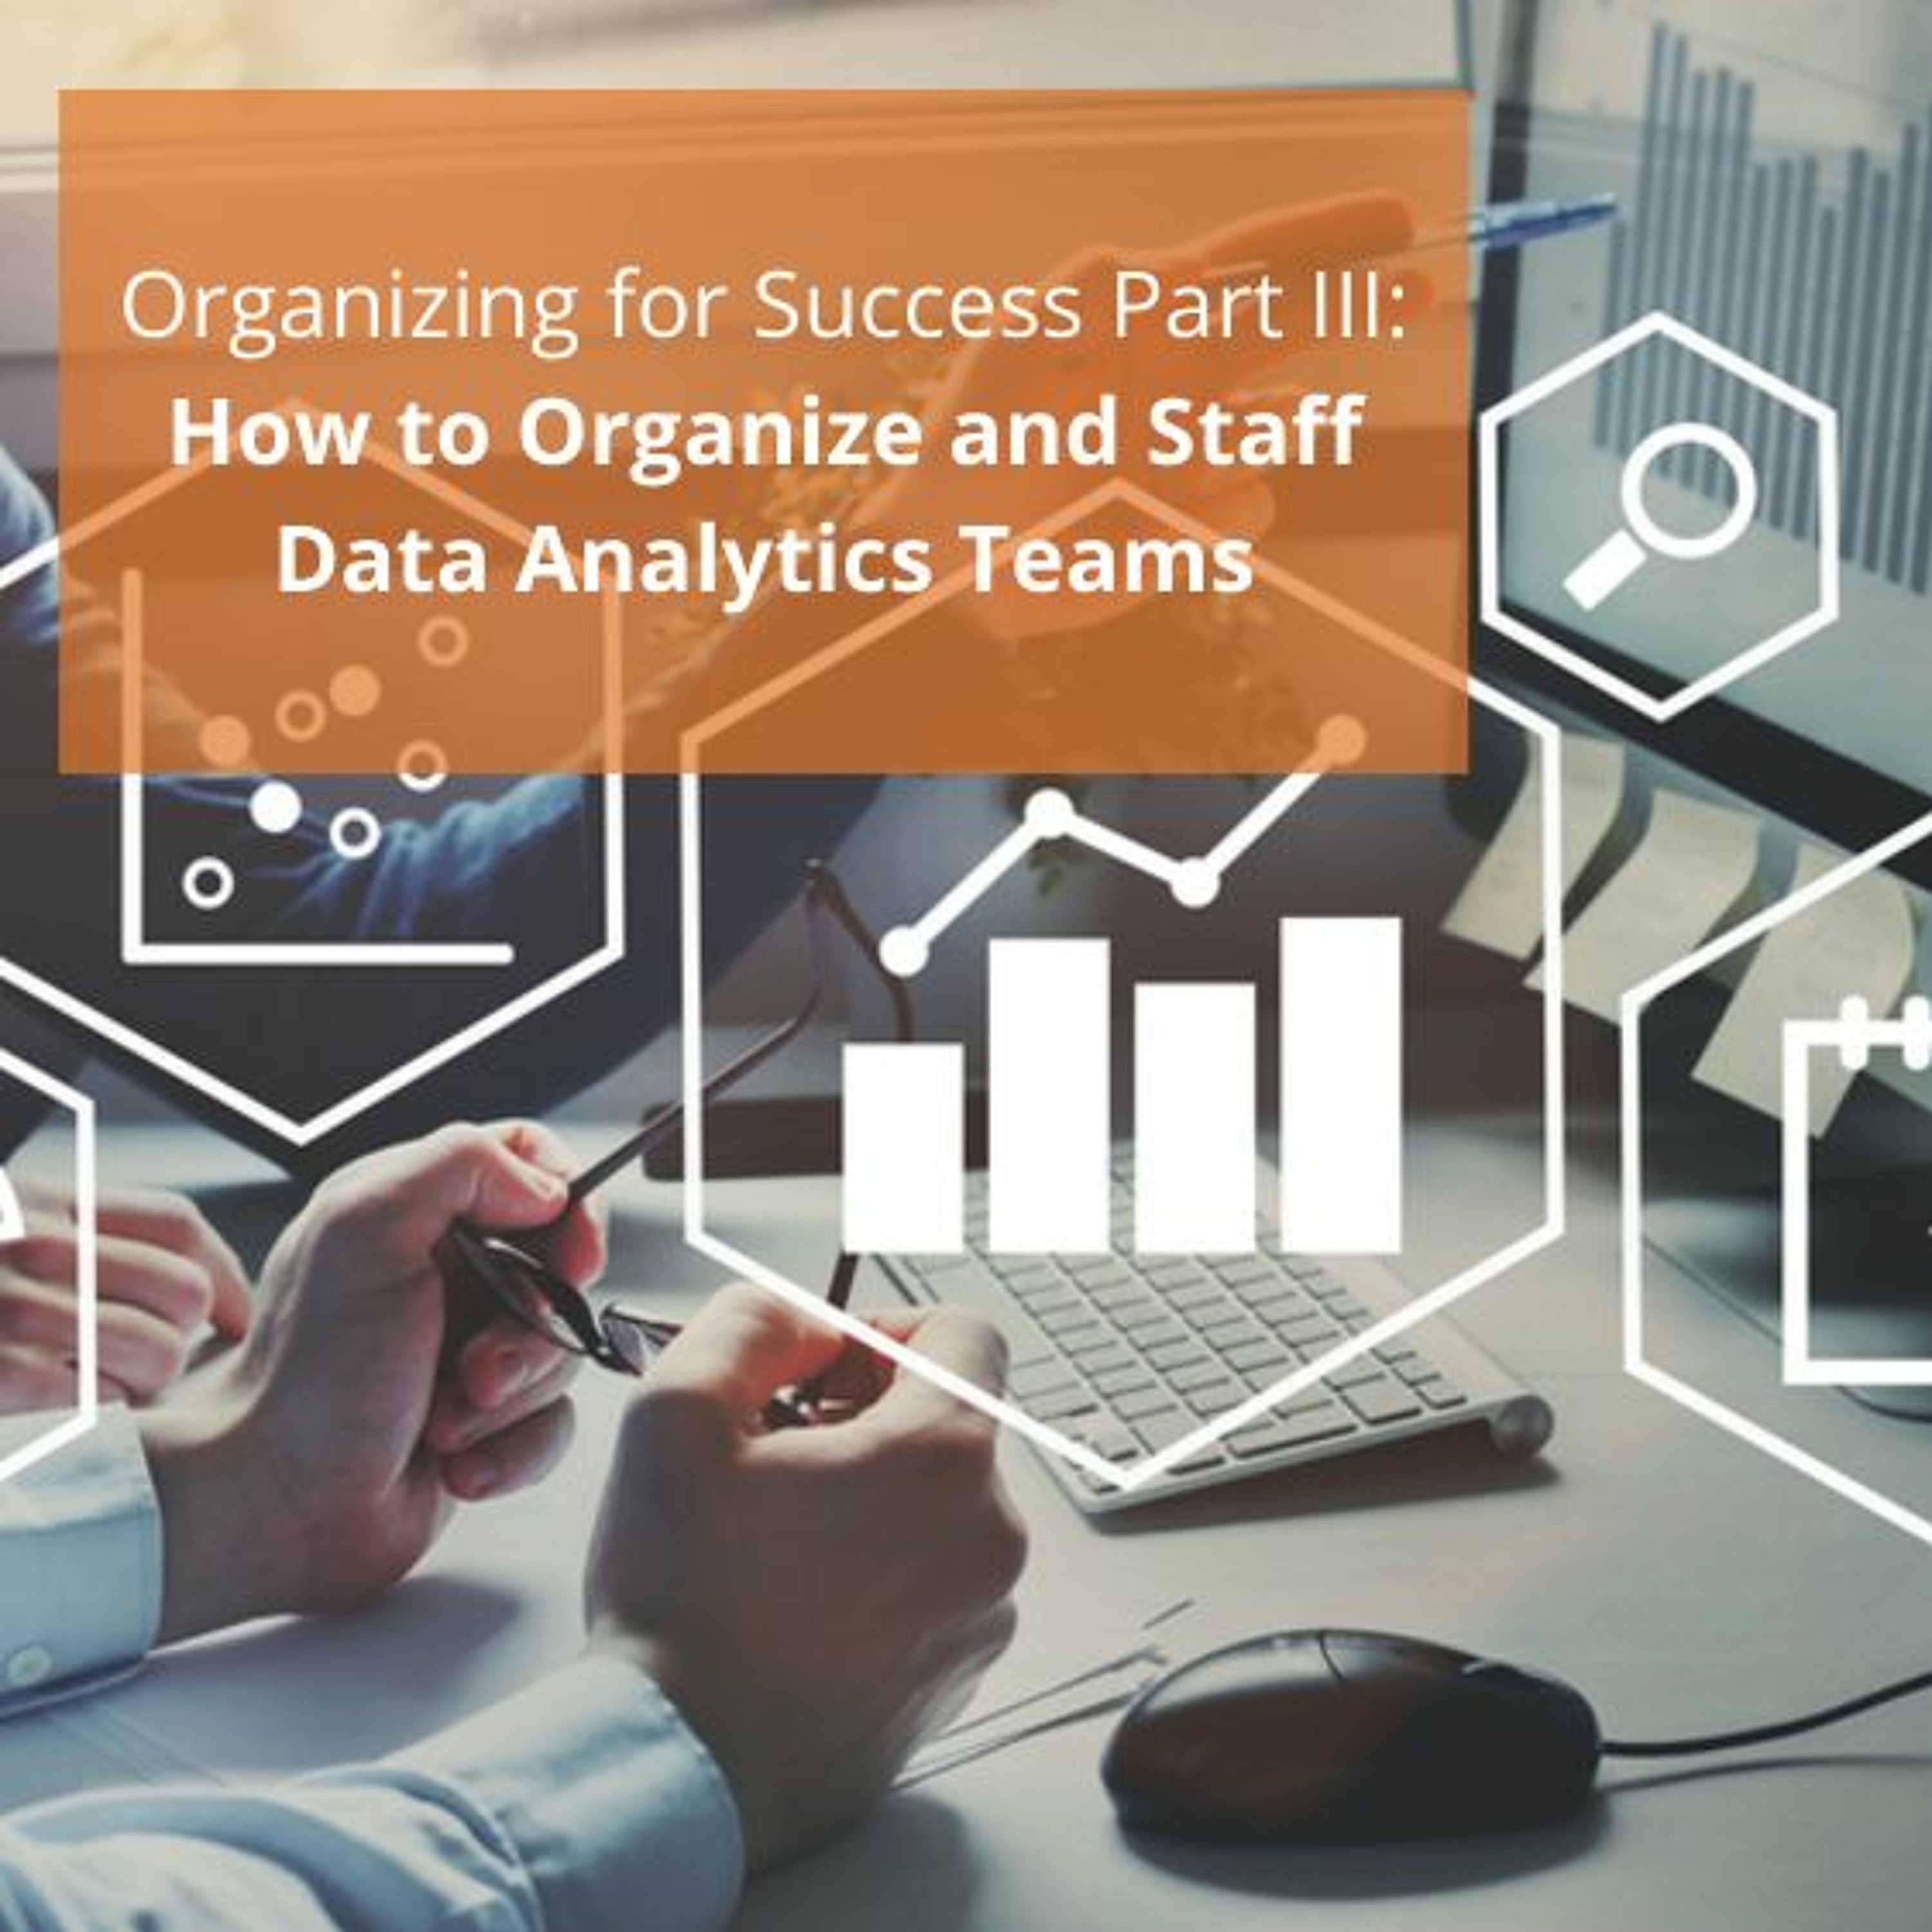 Organizing for Success Part III: How to Organize and Staff Data Analytics Teams - Audio Blog